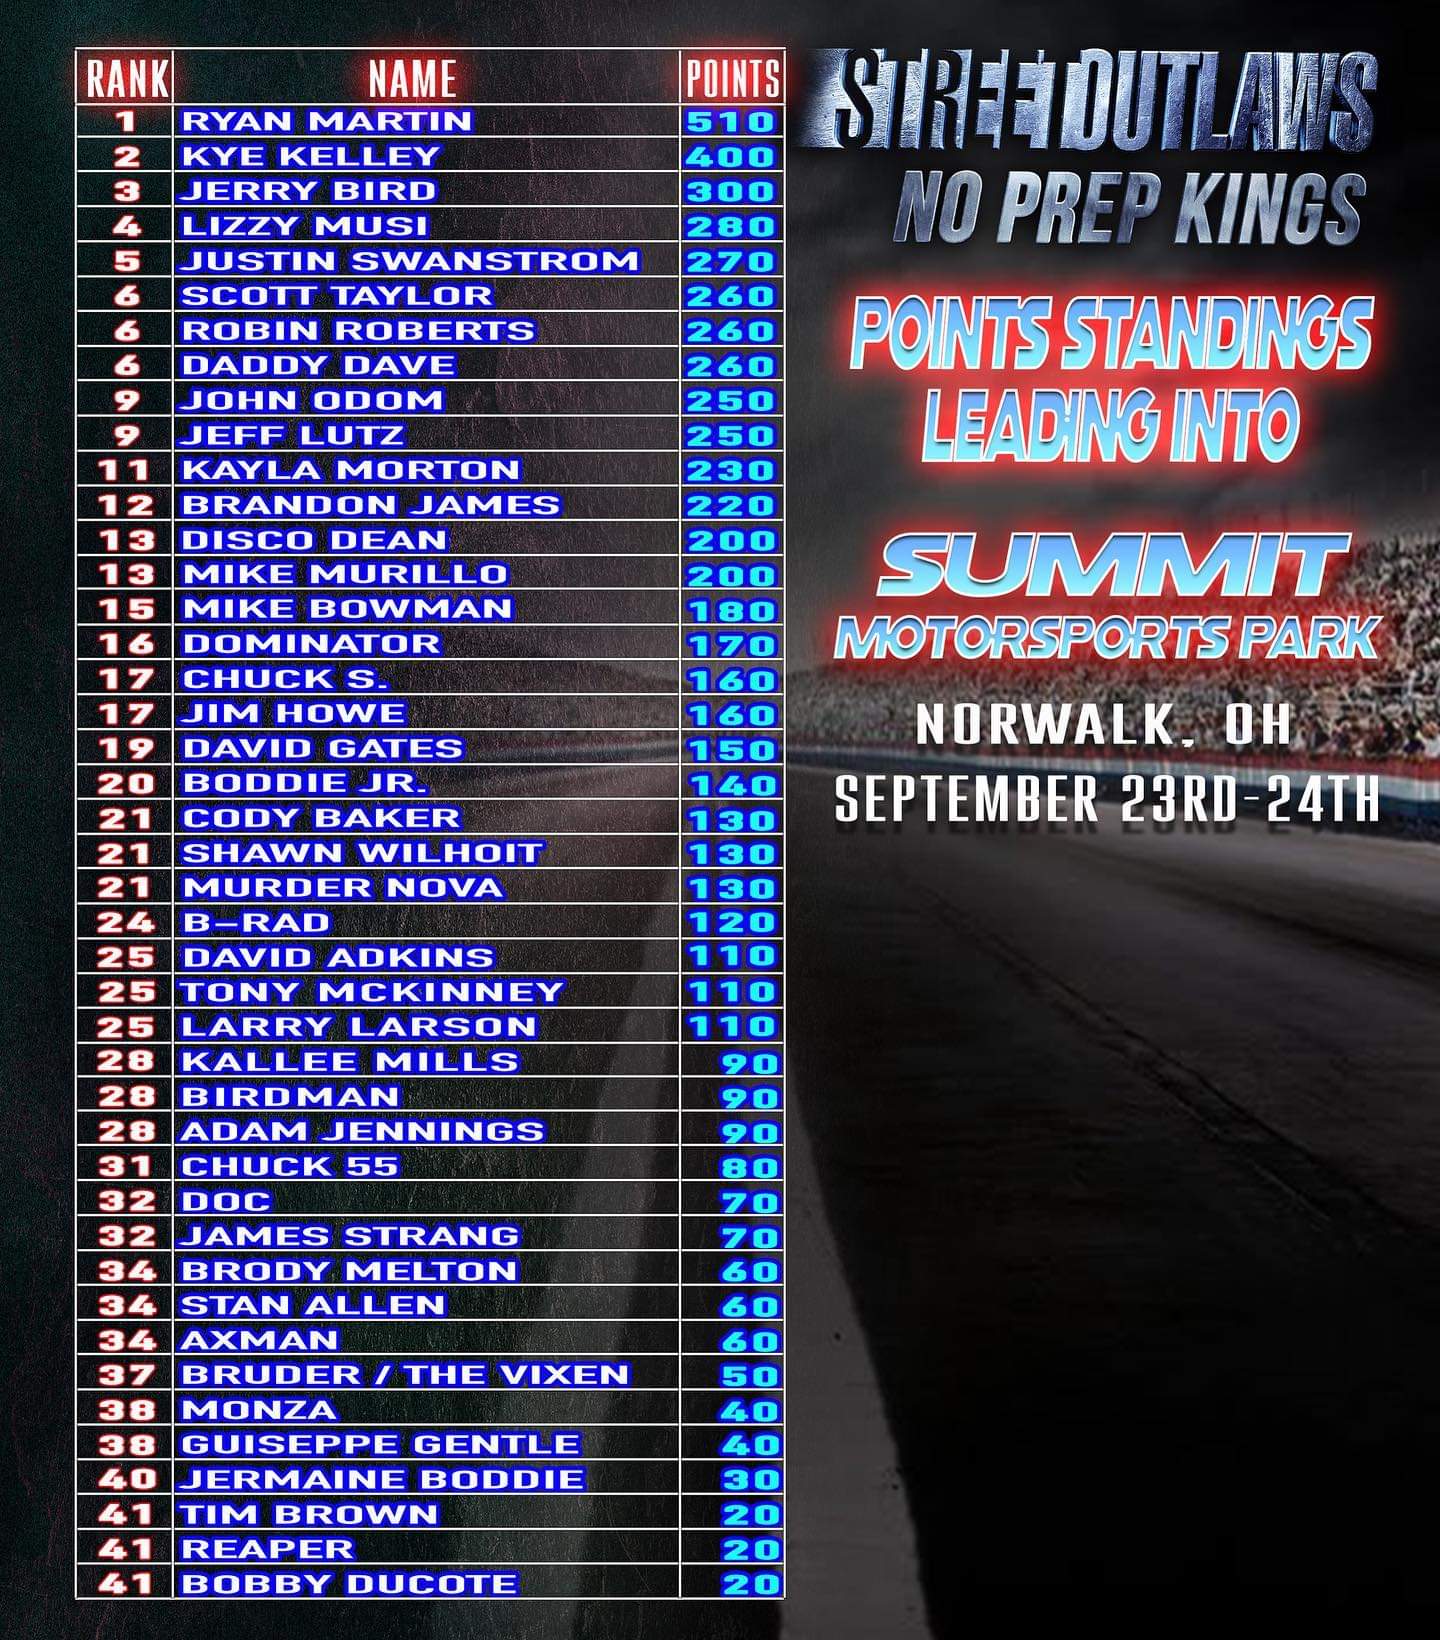 STREET OUTLAWS POINT STANDINGS LEADING INTO SUMMIT MOTORSPORTS PARK THIS WEEKEND